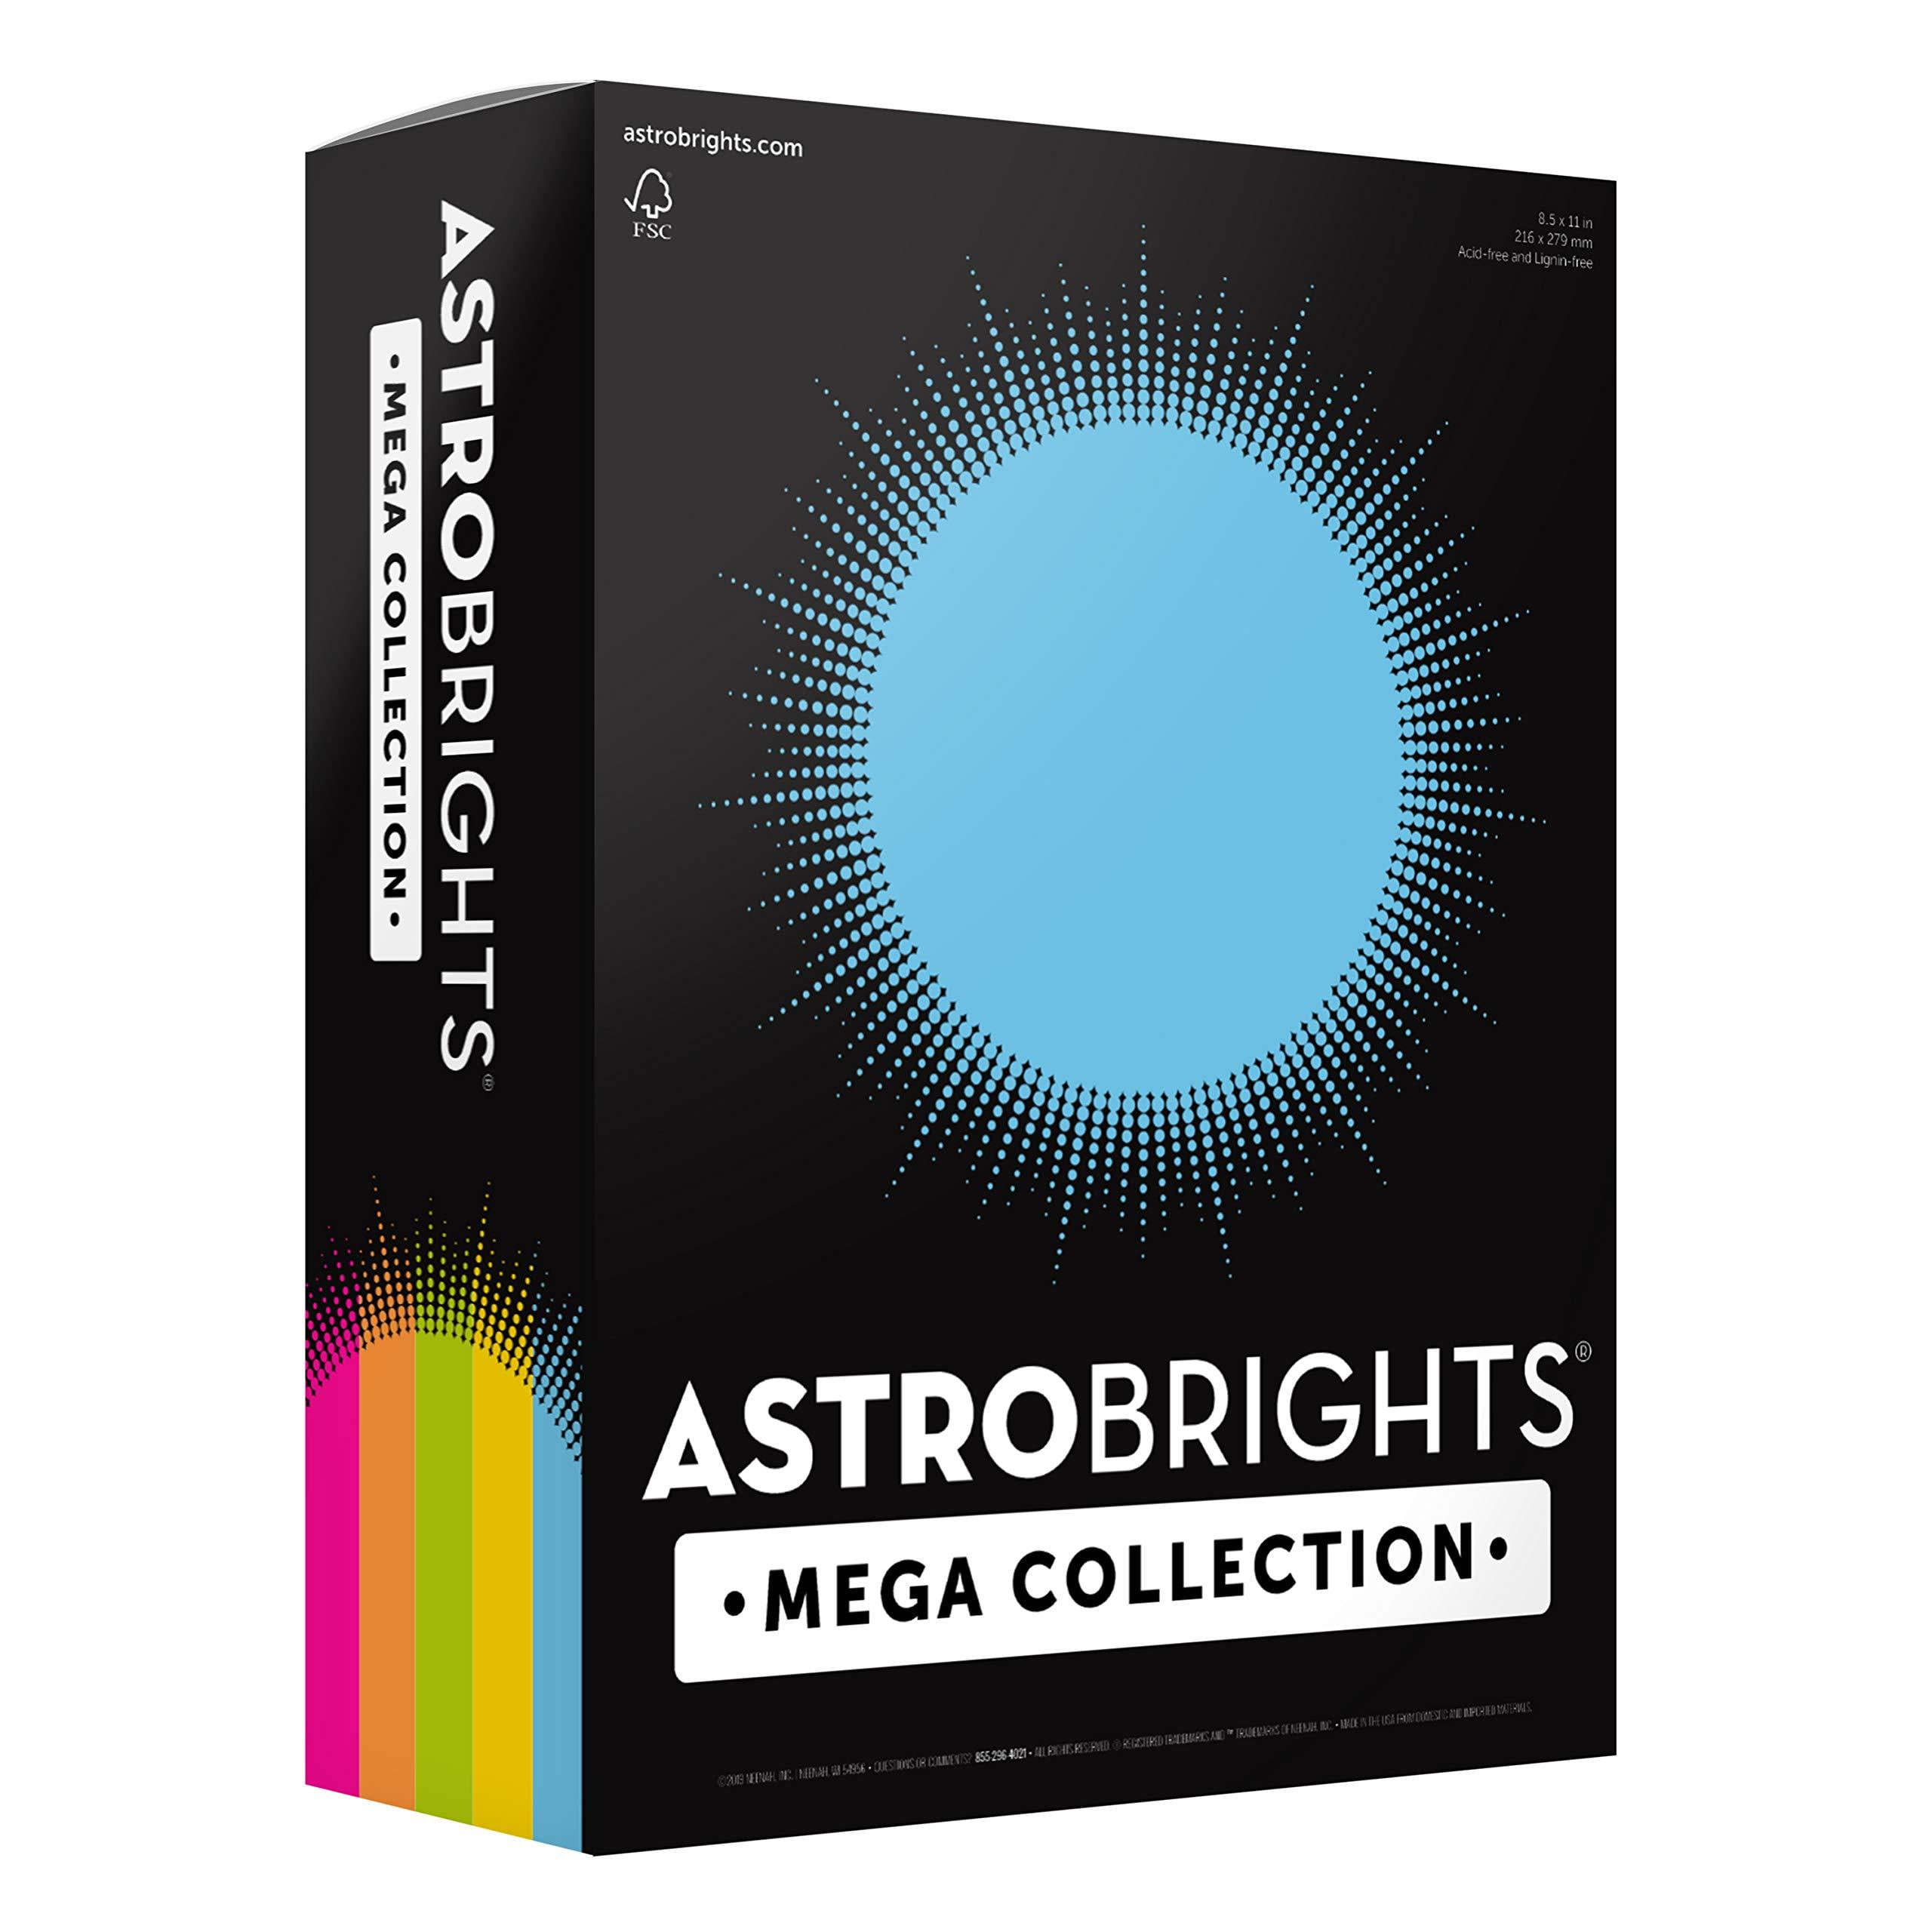 Astrobrights Colored Cardstock, 8.5 x 11, 65 lb/176 gsm, Primary  5-Color Assortment, 5 Individual Packs of 50 Assorted Sheets - 250 Sheets  in total (20401) MSRP $19.99 MSRP $19.99 Auction